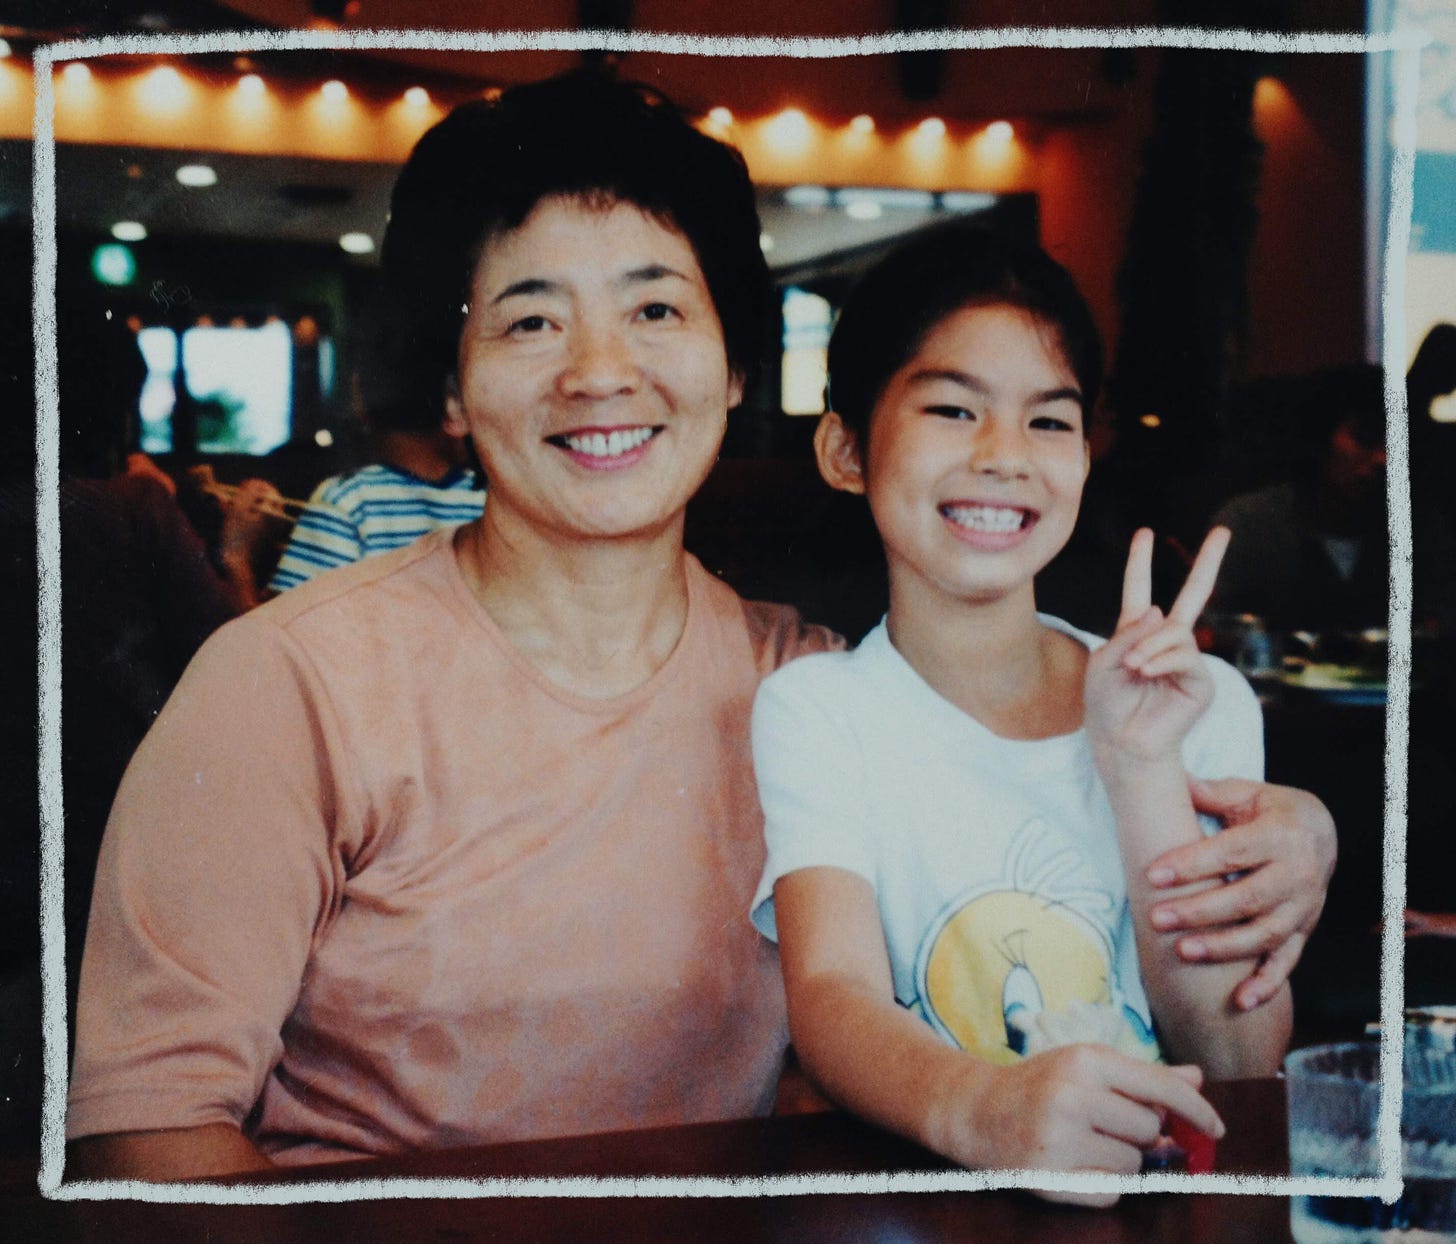 An old photo of the author and Obaachan, her Japanese grandma. They are sitting together at a restaurant, smiling for the camera. Obaachan has her left arm around Erika, and Erika is holding up a peace sign.